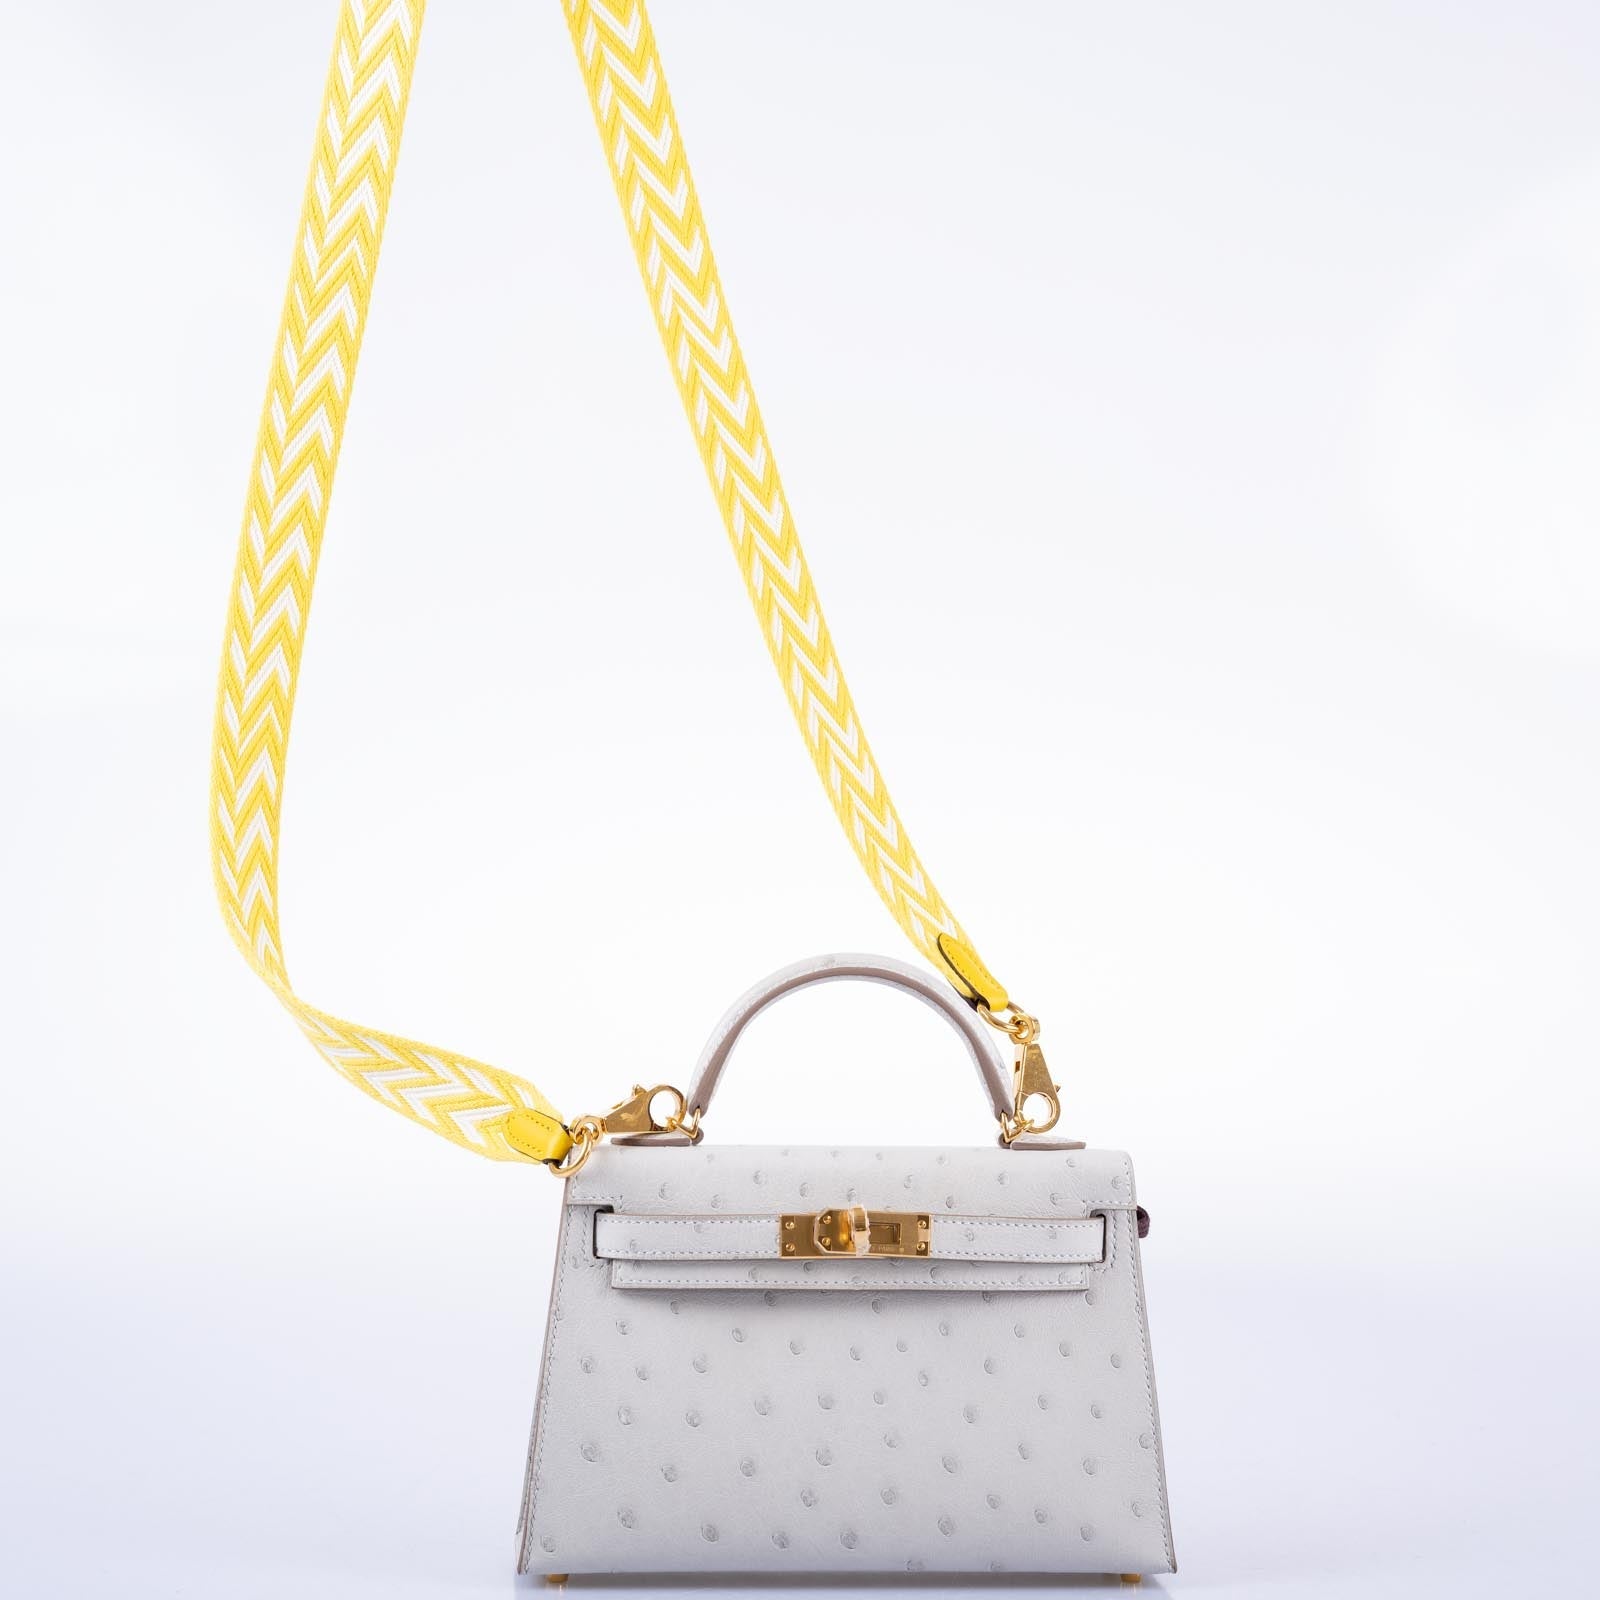 Hermes Kelly 28 Sellier Ostrich Gris Perle